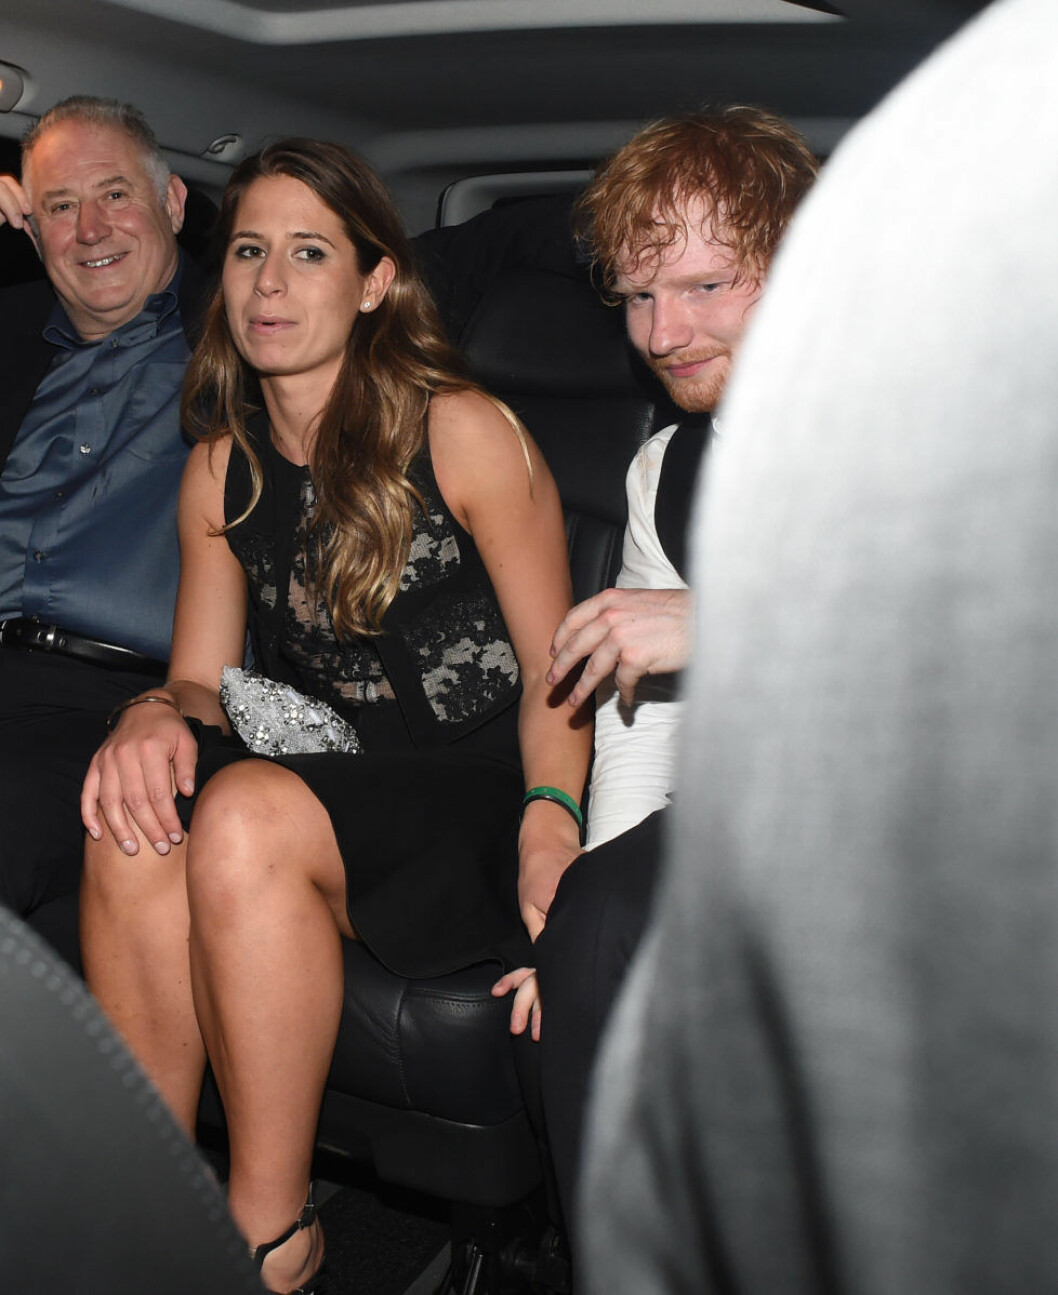 Ed Sheeran leaves the afterparty for his new movie with his girlfriend Cherry Seaborn in London Pictured: Ed Sheeran,Cherry Seaborn Ref: SPL1157965 221015 Picture by: Splash News Splash News and Pictures Los Angeles:310-821-2666 New York: 212-619-2666 London: 870-934-2666 photodesk@splashnews.com 